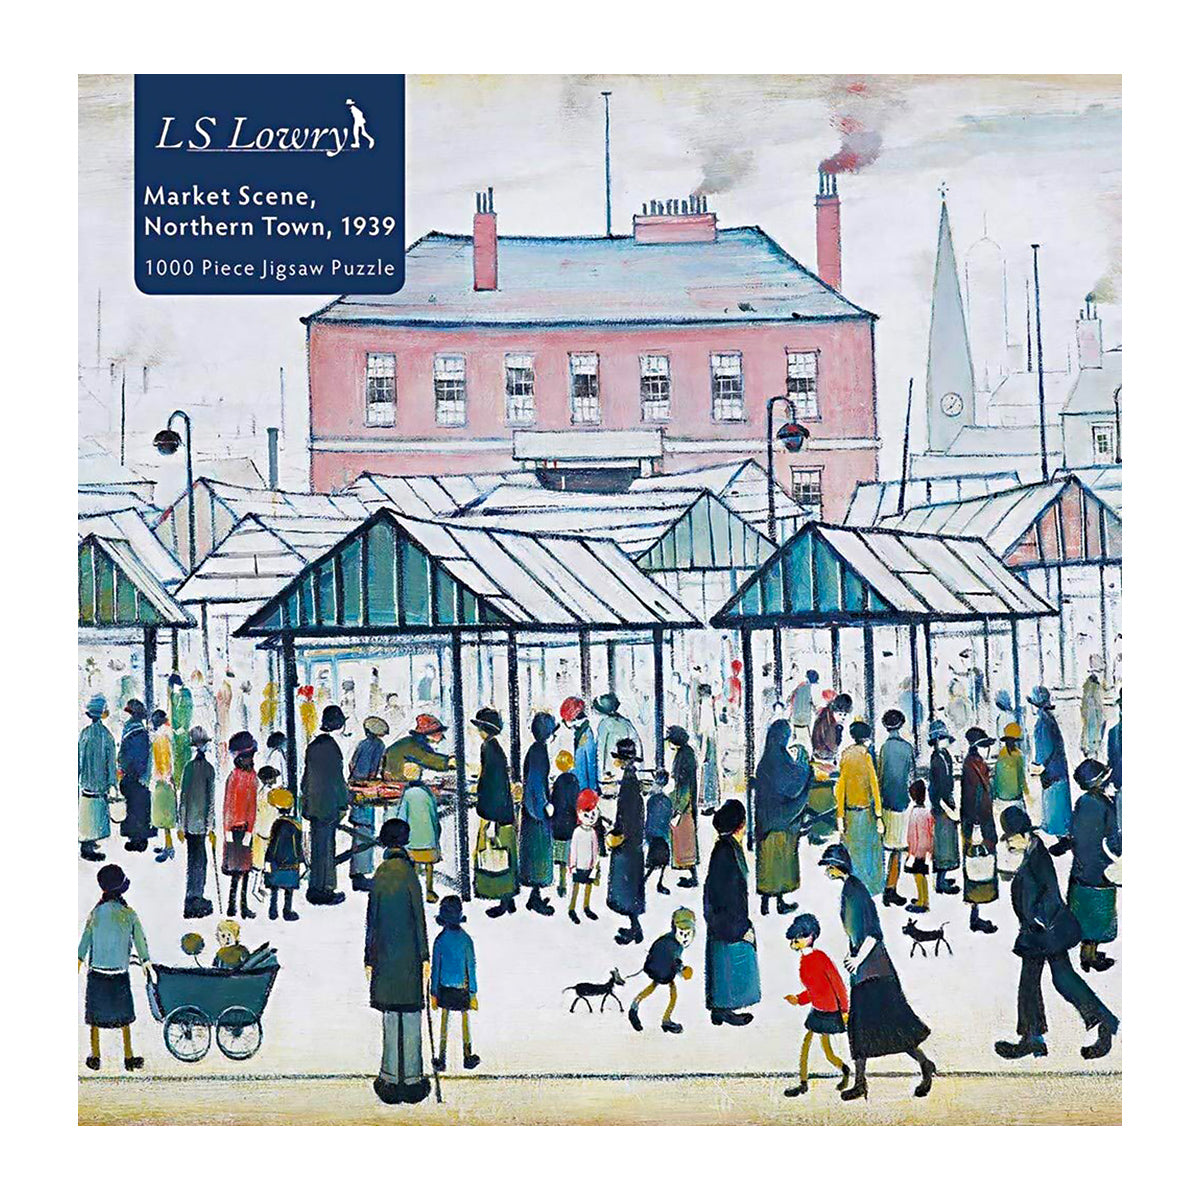 Lowry-inspired jigsaw puzzle with 1000 pieces